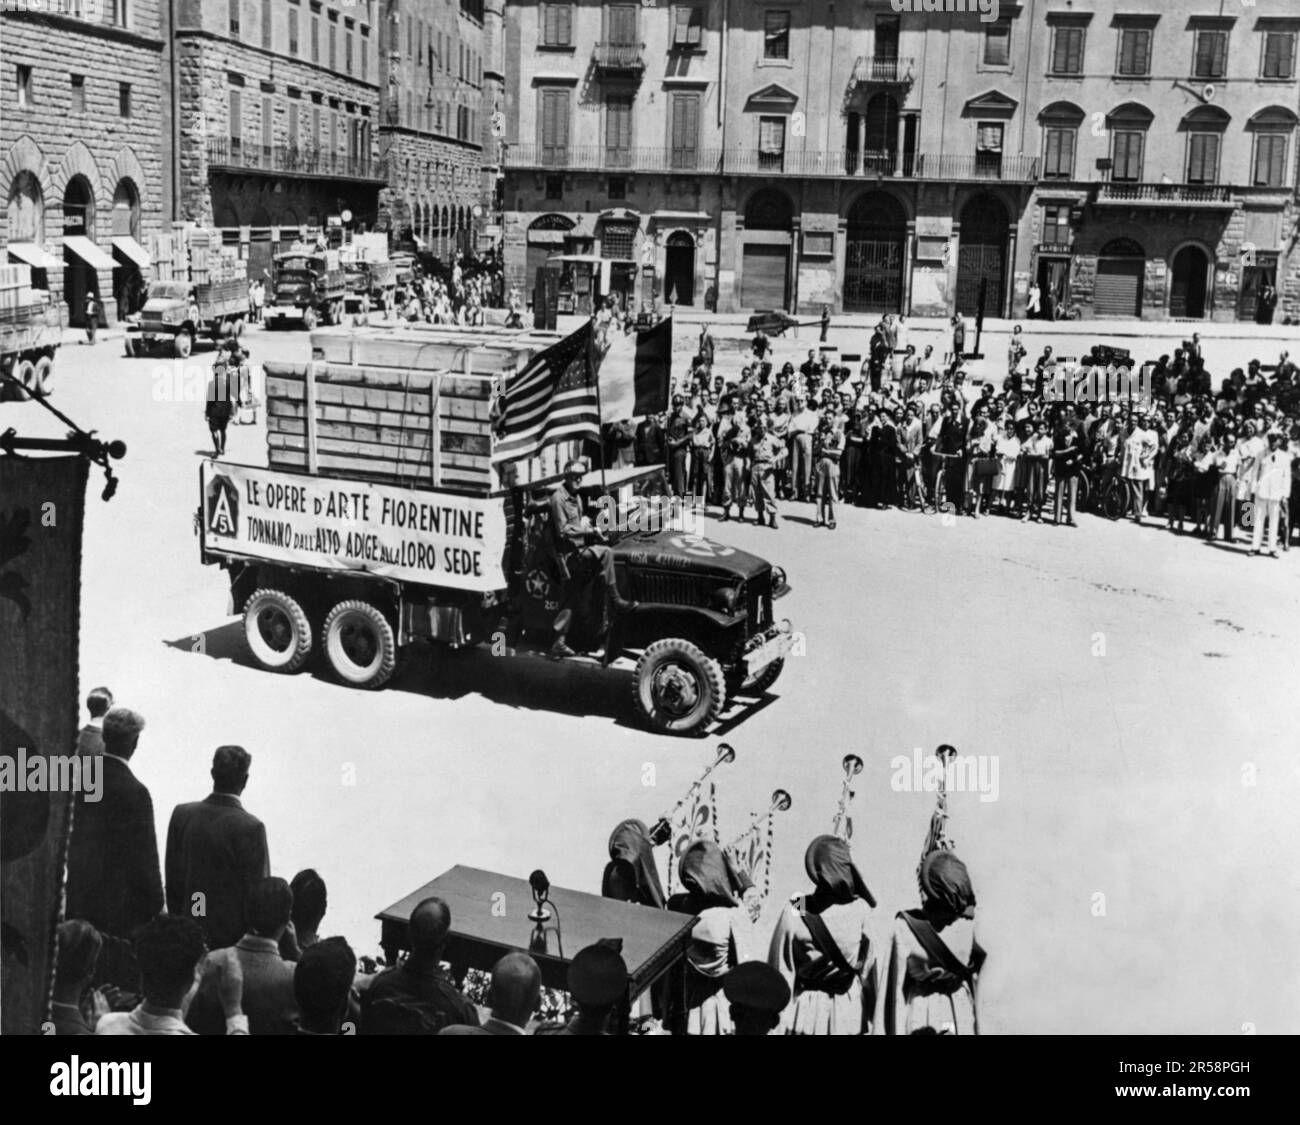 1945 , 25 july , Florence , ITALY : The italians welcome home art treasures stolen by the Germans and returned by Americans. Florentine Art Returned . U.S. Fifth Army trucks with part of the billion dollars worth of art treasures stolen by the Germans arrive at the Plaza Signoria, Florence . Trumpeters garbed in medieval costume ( the few survived in War ) stand before the reviewing stand to welcome the return of the priceless paintings which had been hidden by the Germans on the upper Adige River near Bolzano ( Trentino Alto Adige ), North Italy  . The paintings were presented to the Mayor of Stock Photo